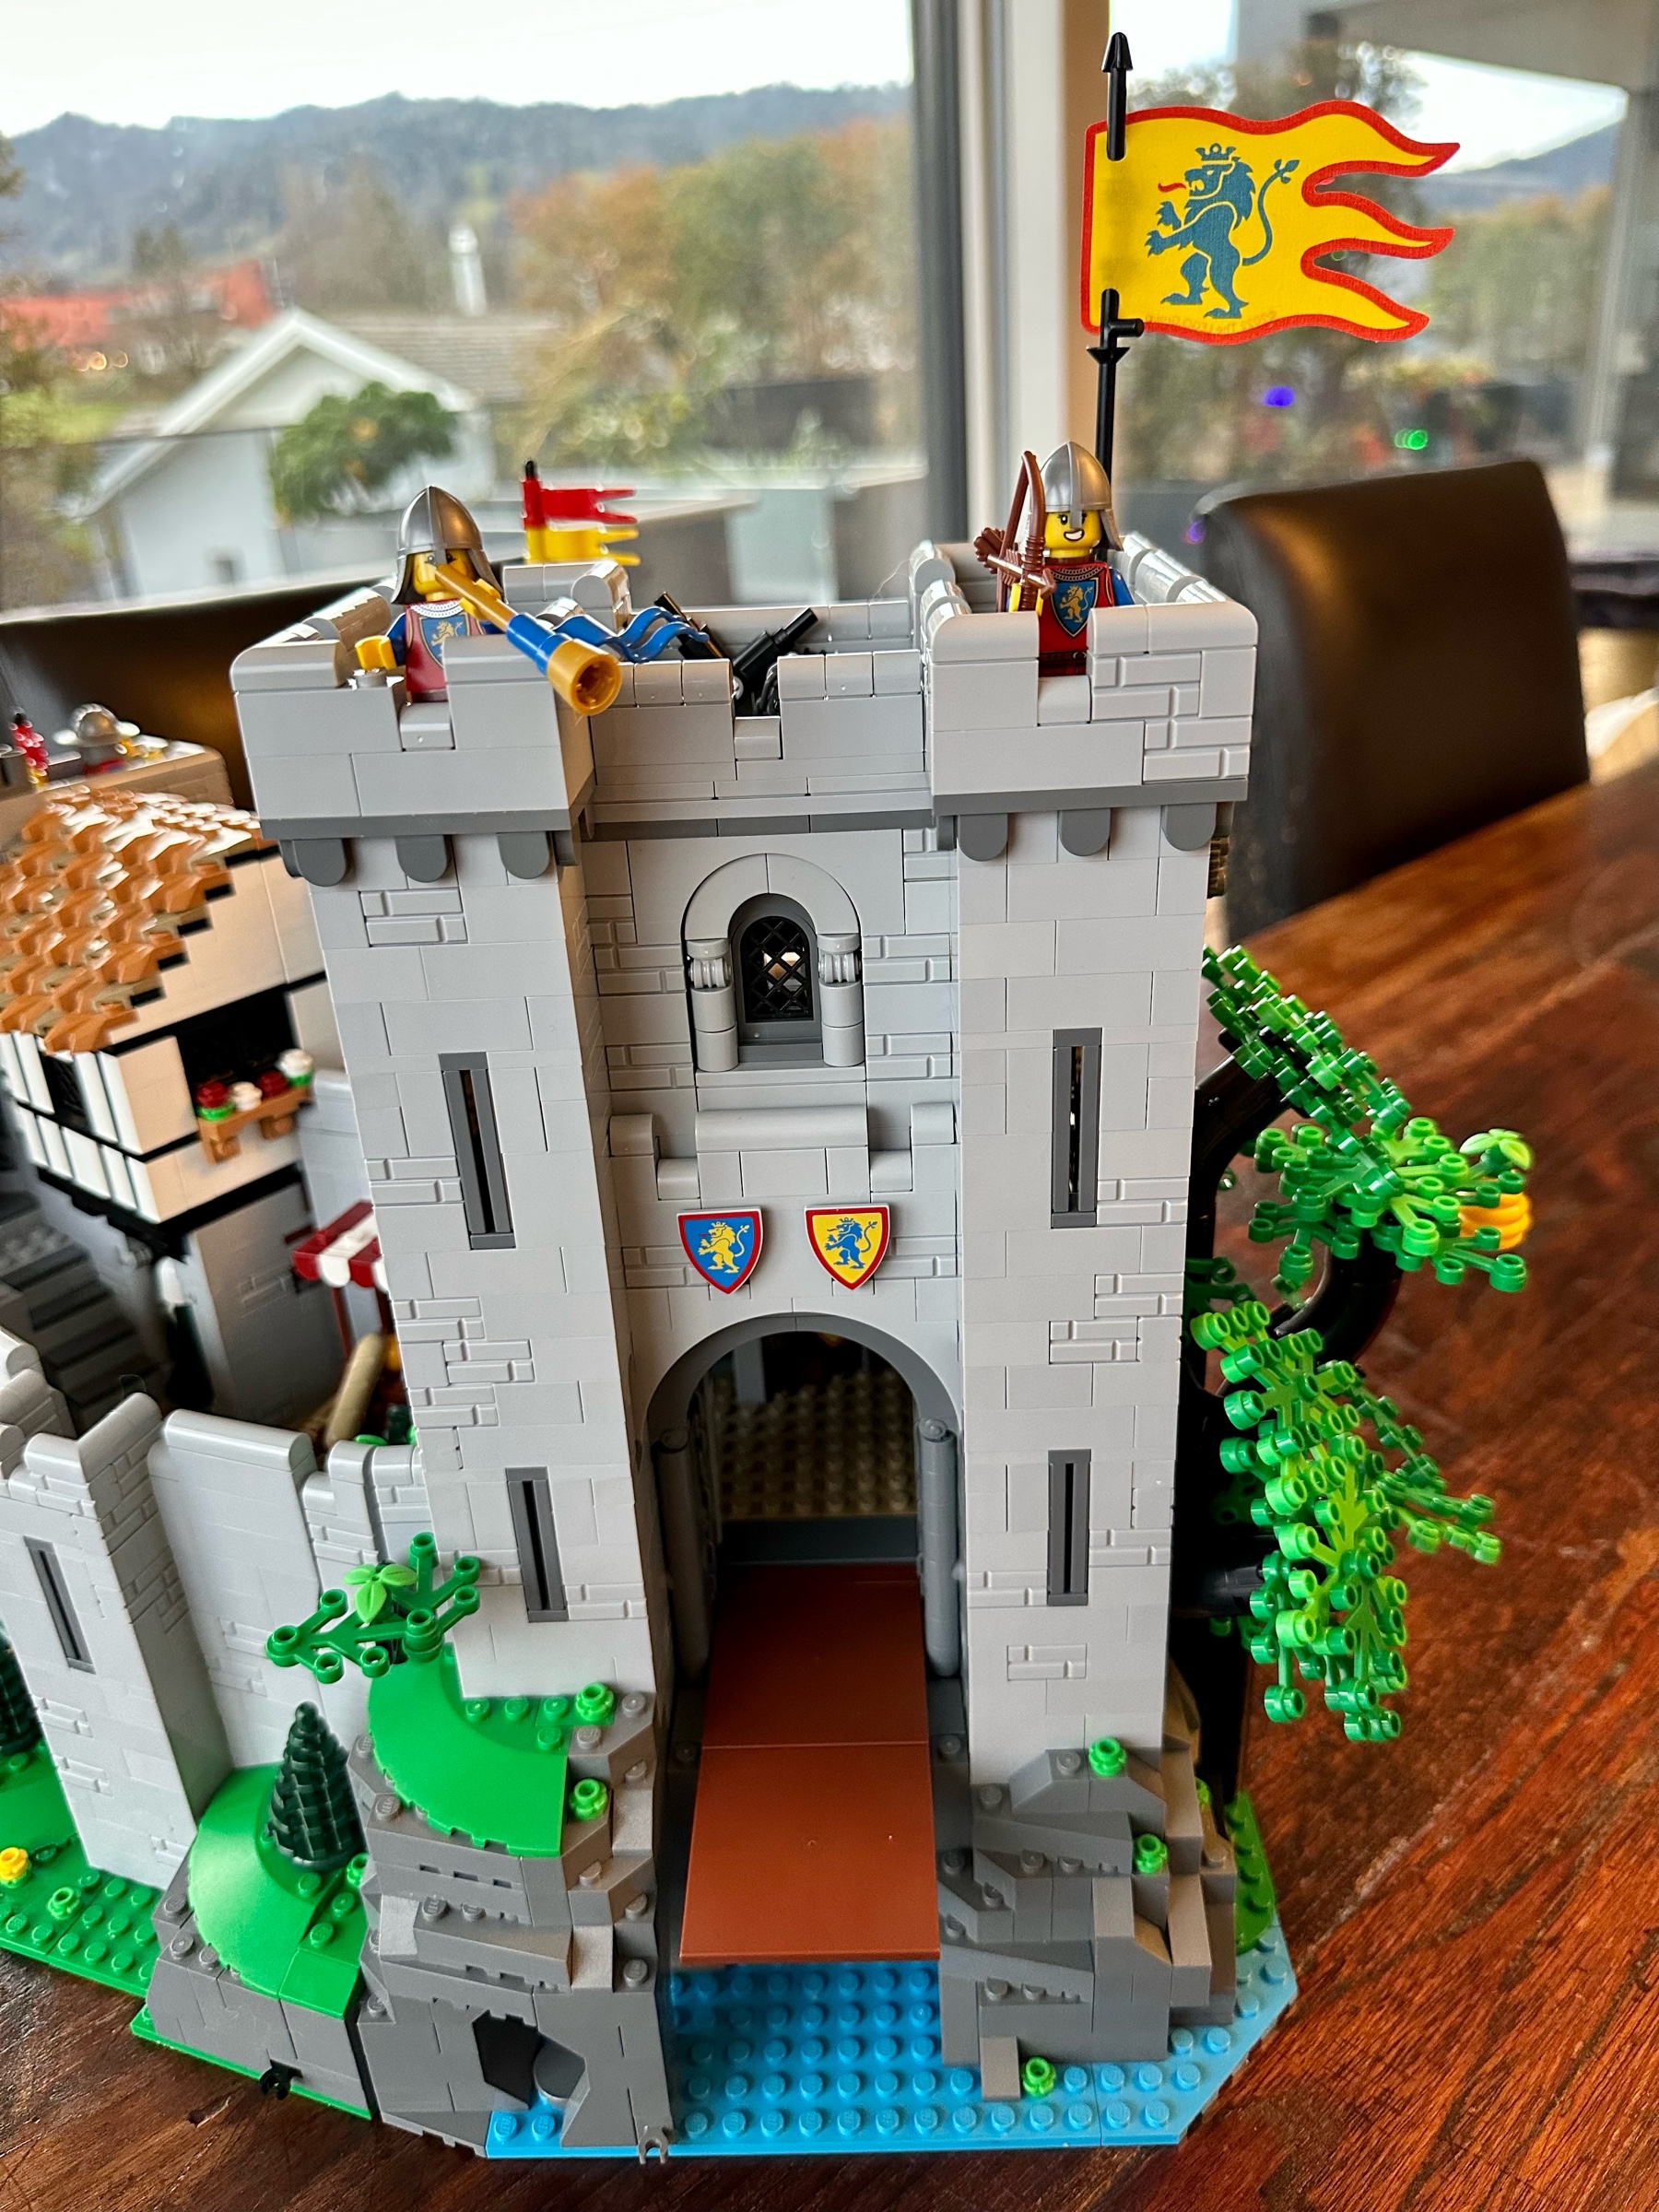 LEGO castle with two guards on top. The left guard is blowing a trumpet.